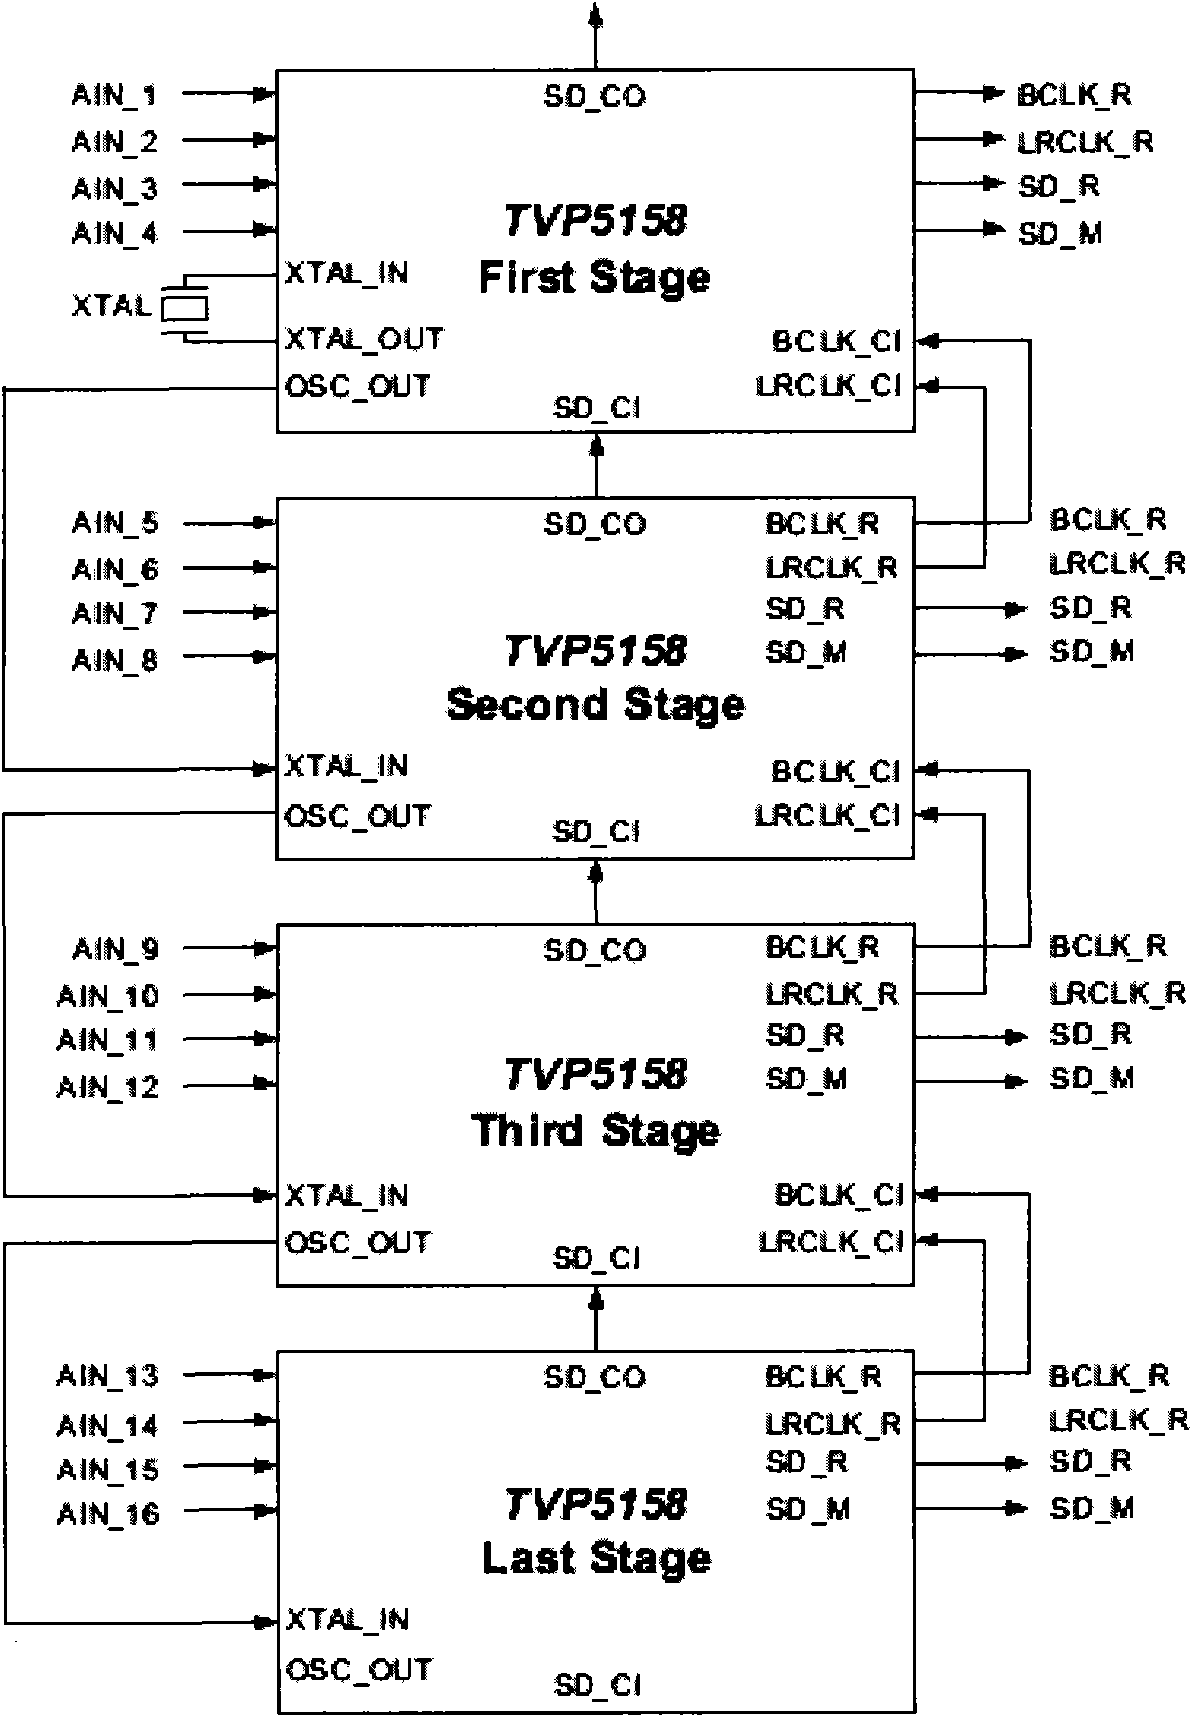 Multi-path audio collecting system